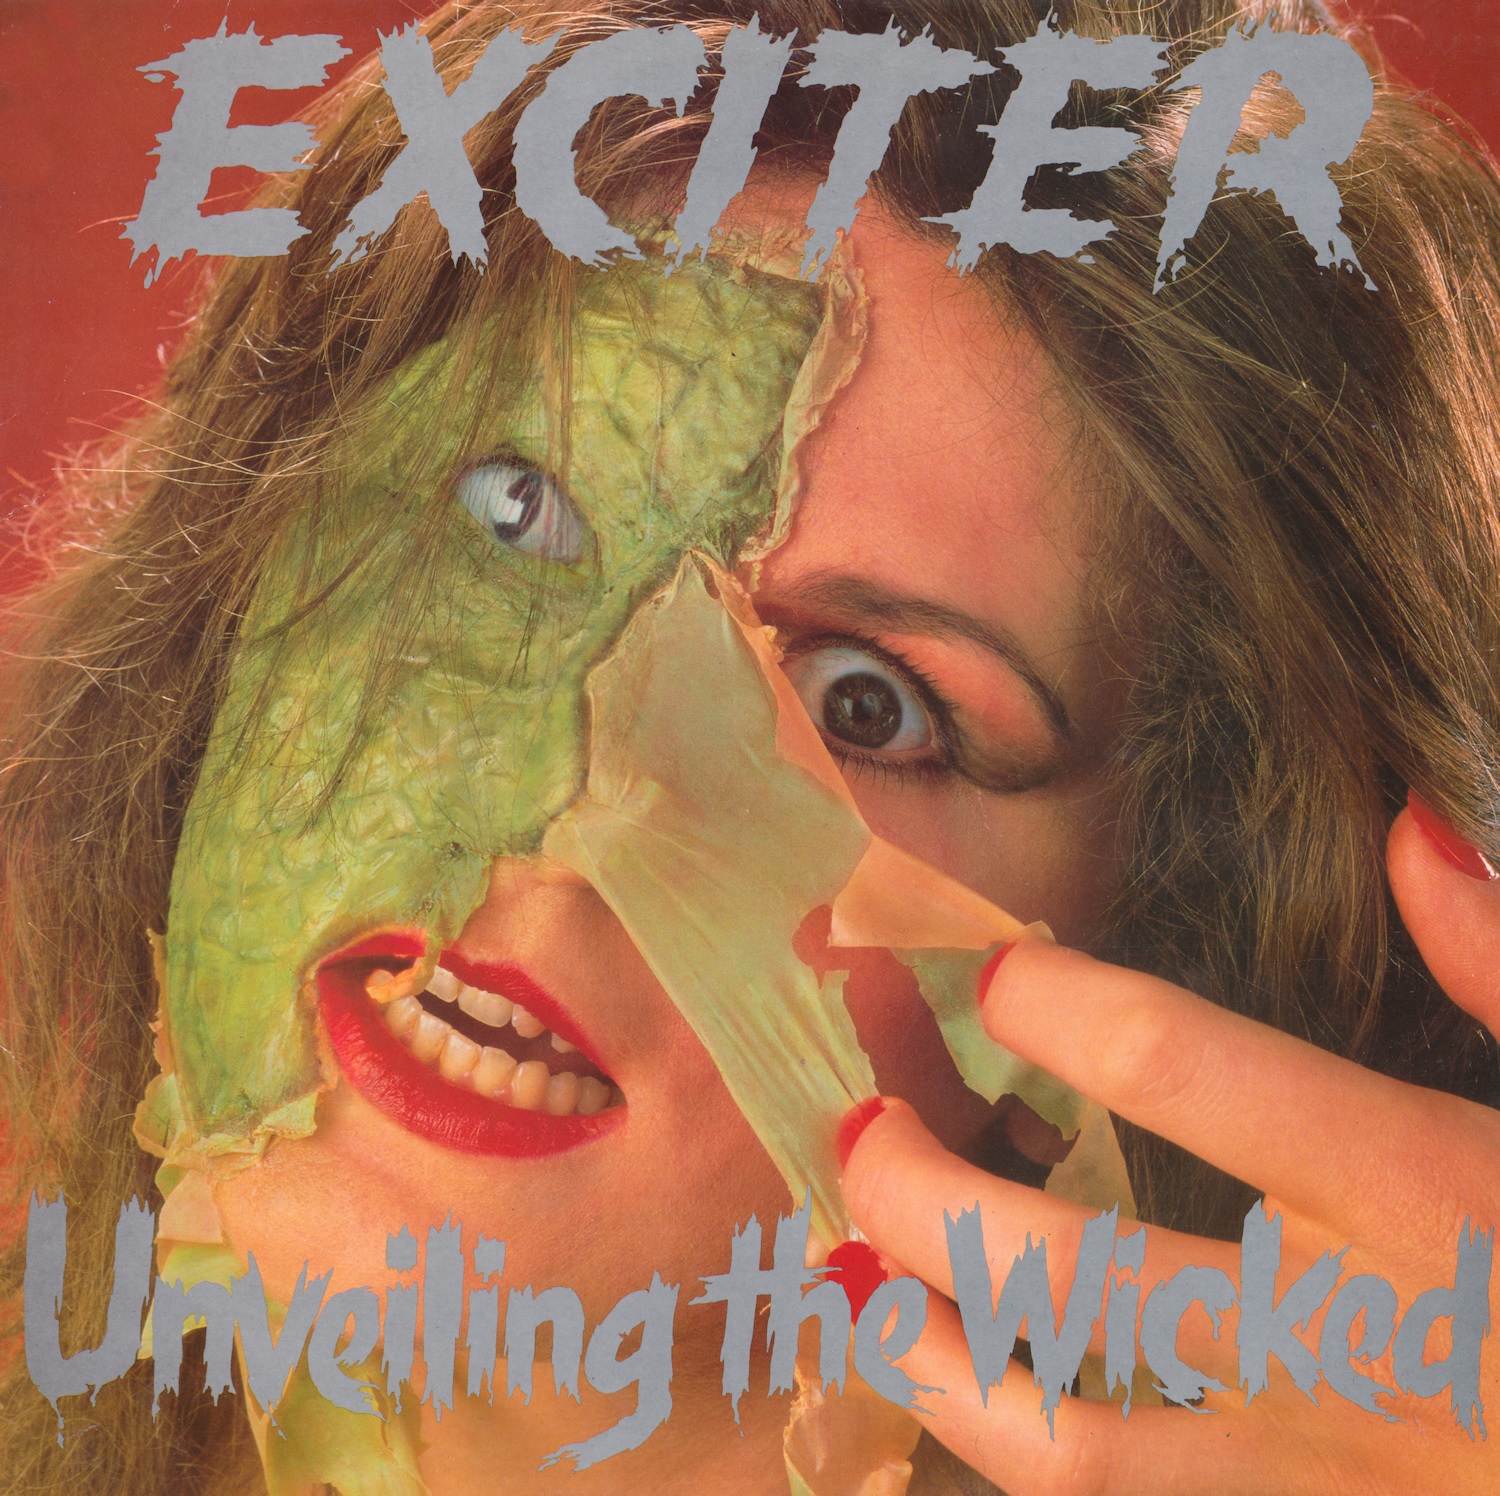 EXCITER - Unveiling the Wicked cover 